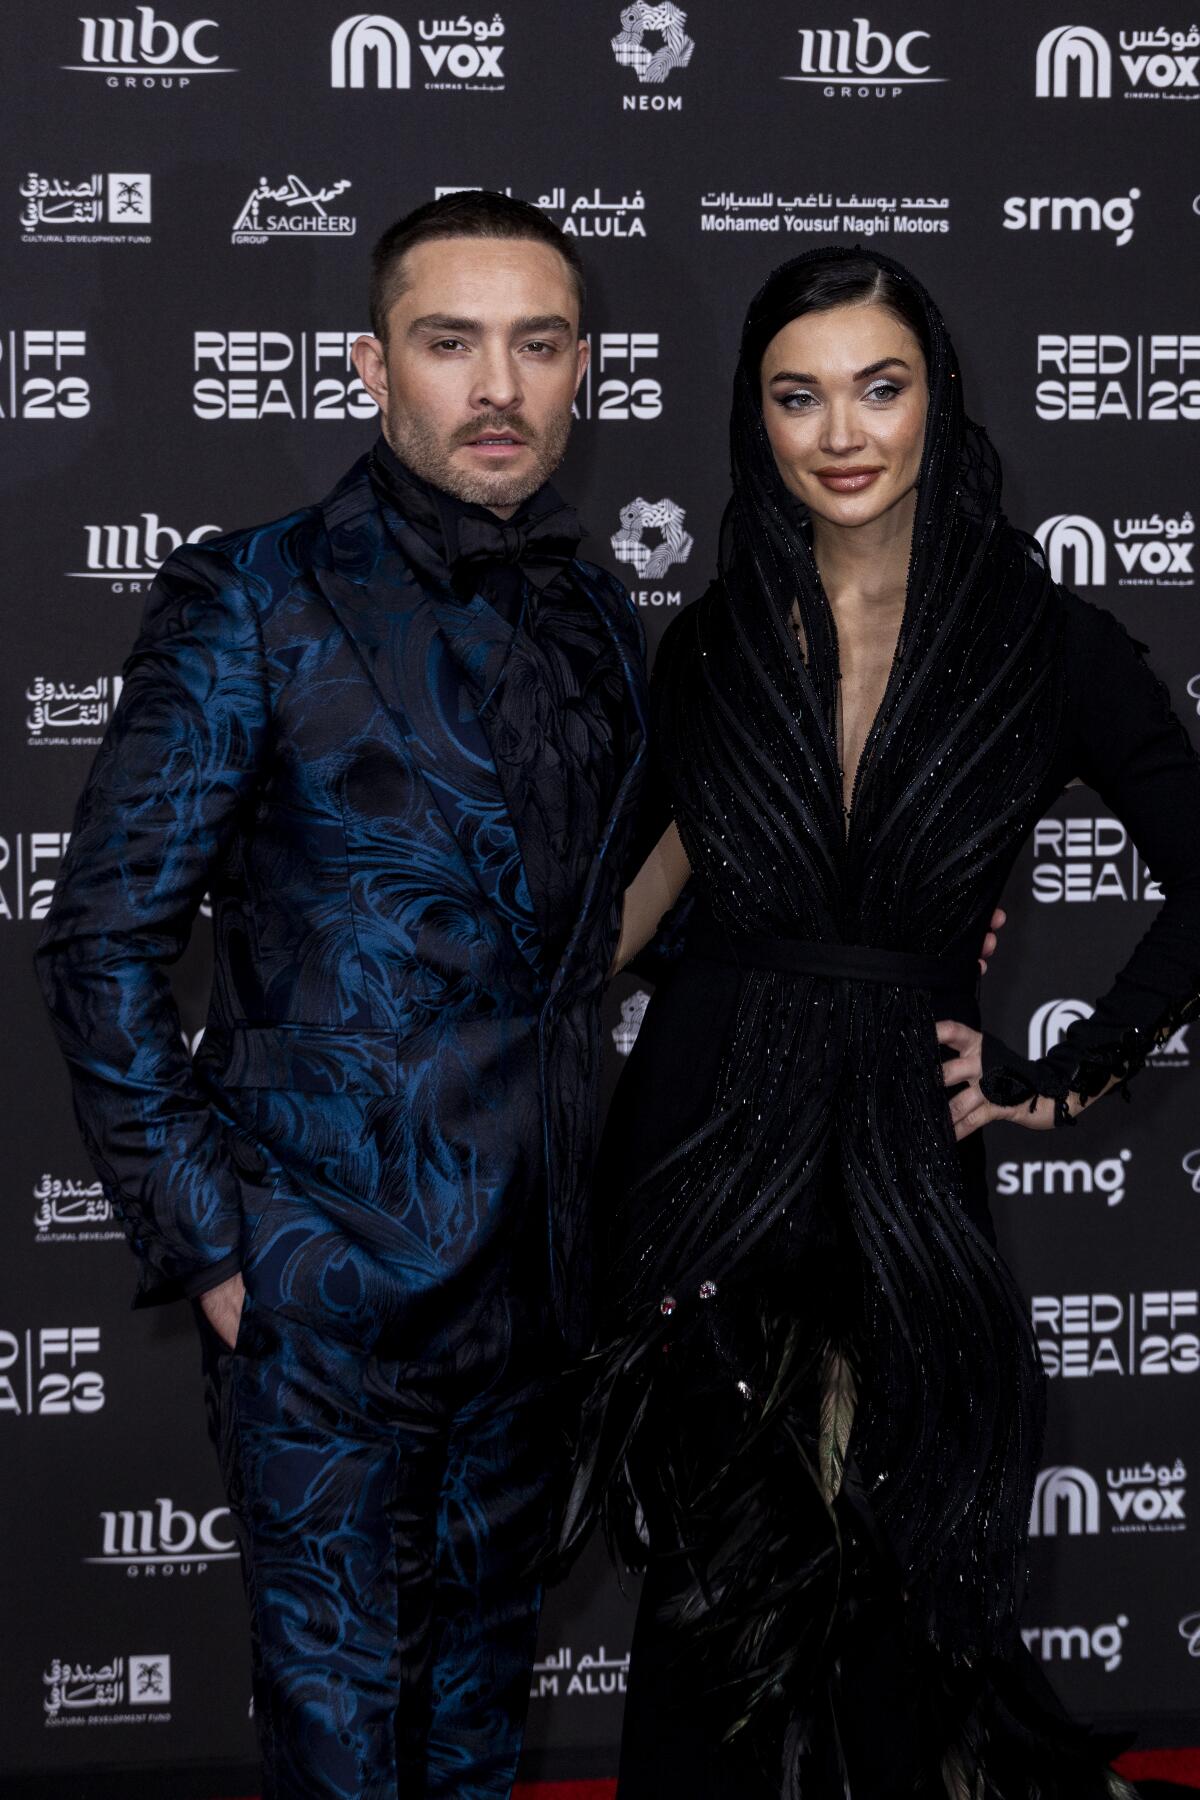 Ed Westwick and Amy Jackson dressed in dark formalwear pose together for a photo in front of a backdrop